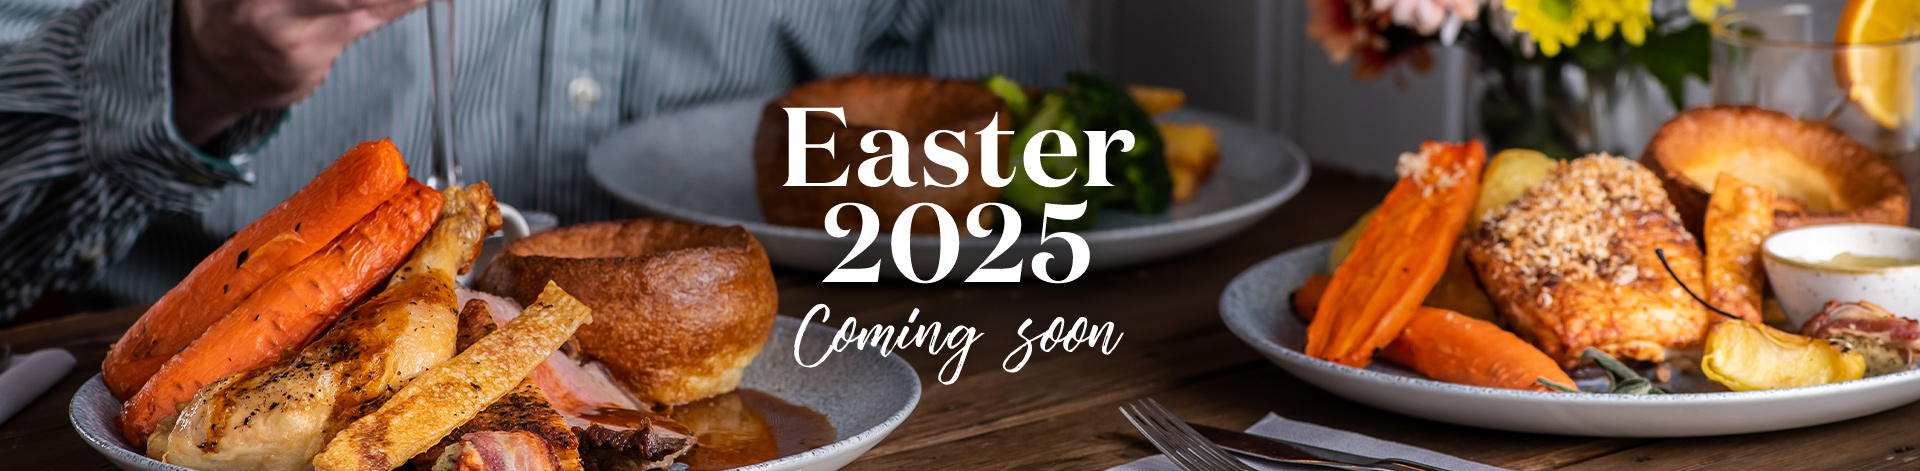 Easter at The Red Lion, Alvechurch in Birmingham